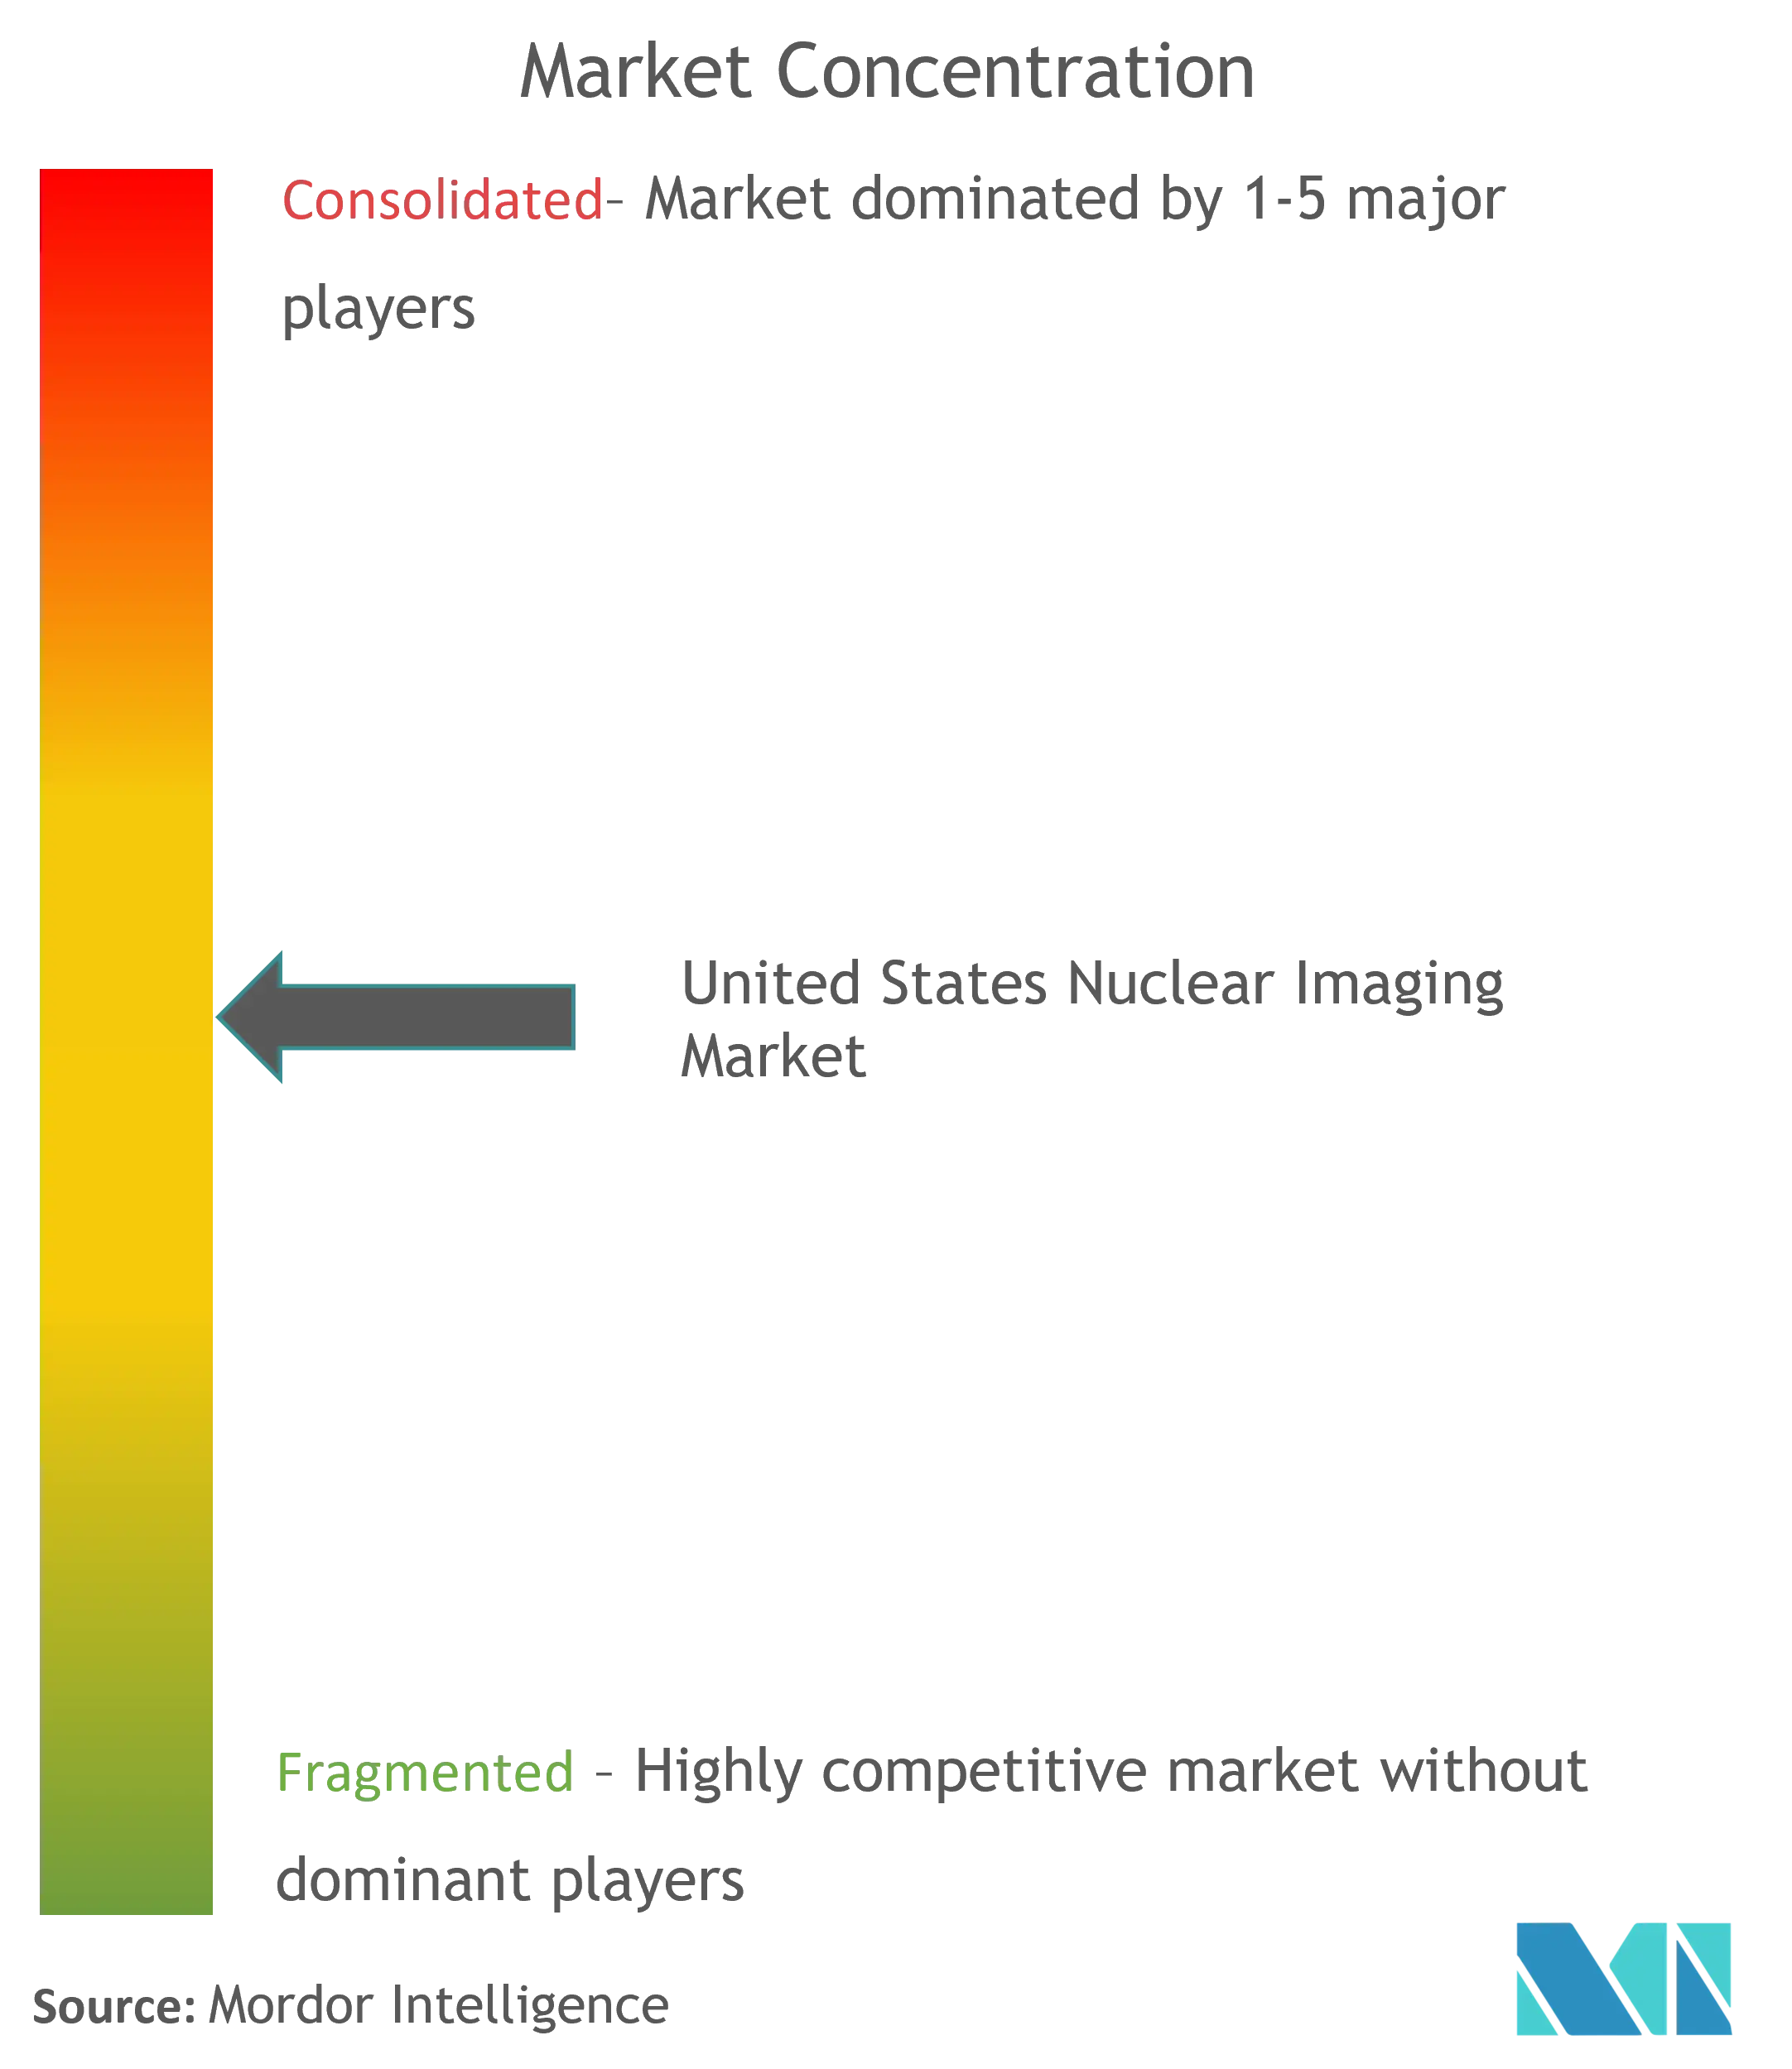 United States Nuclear Imaging Market Concentration